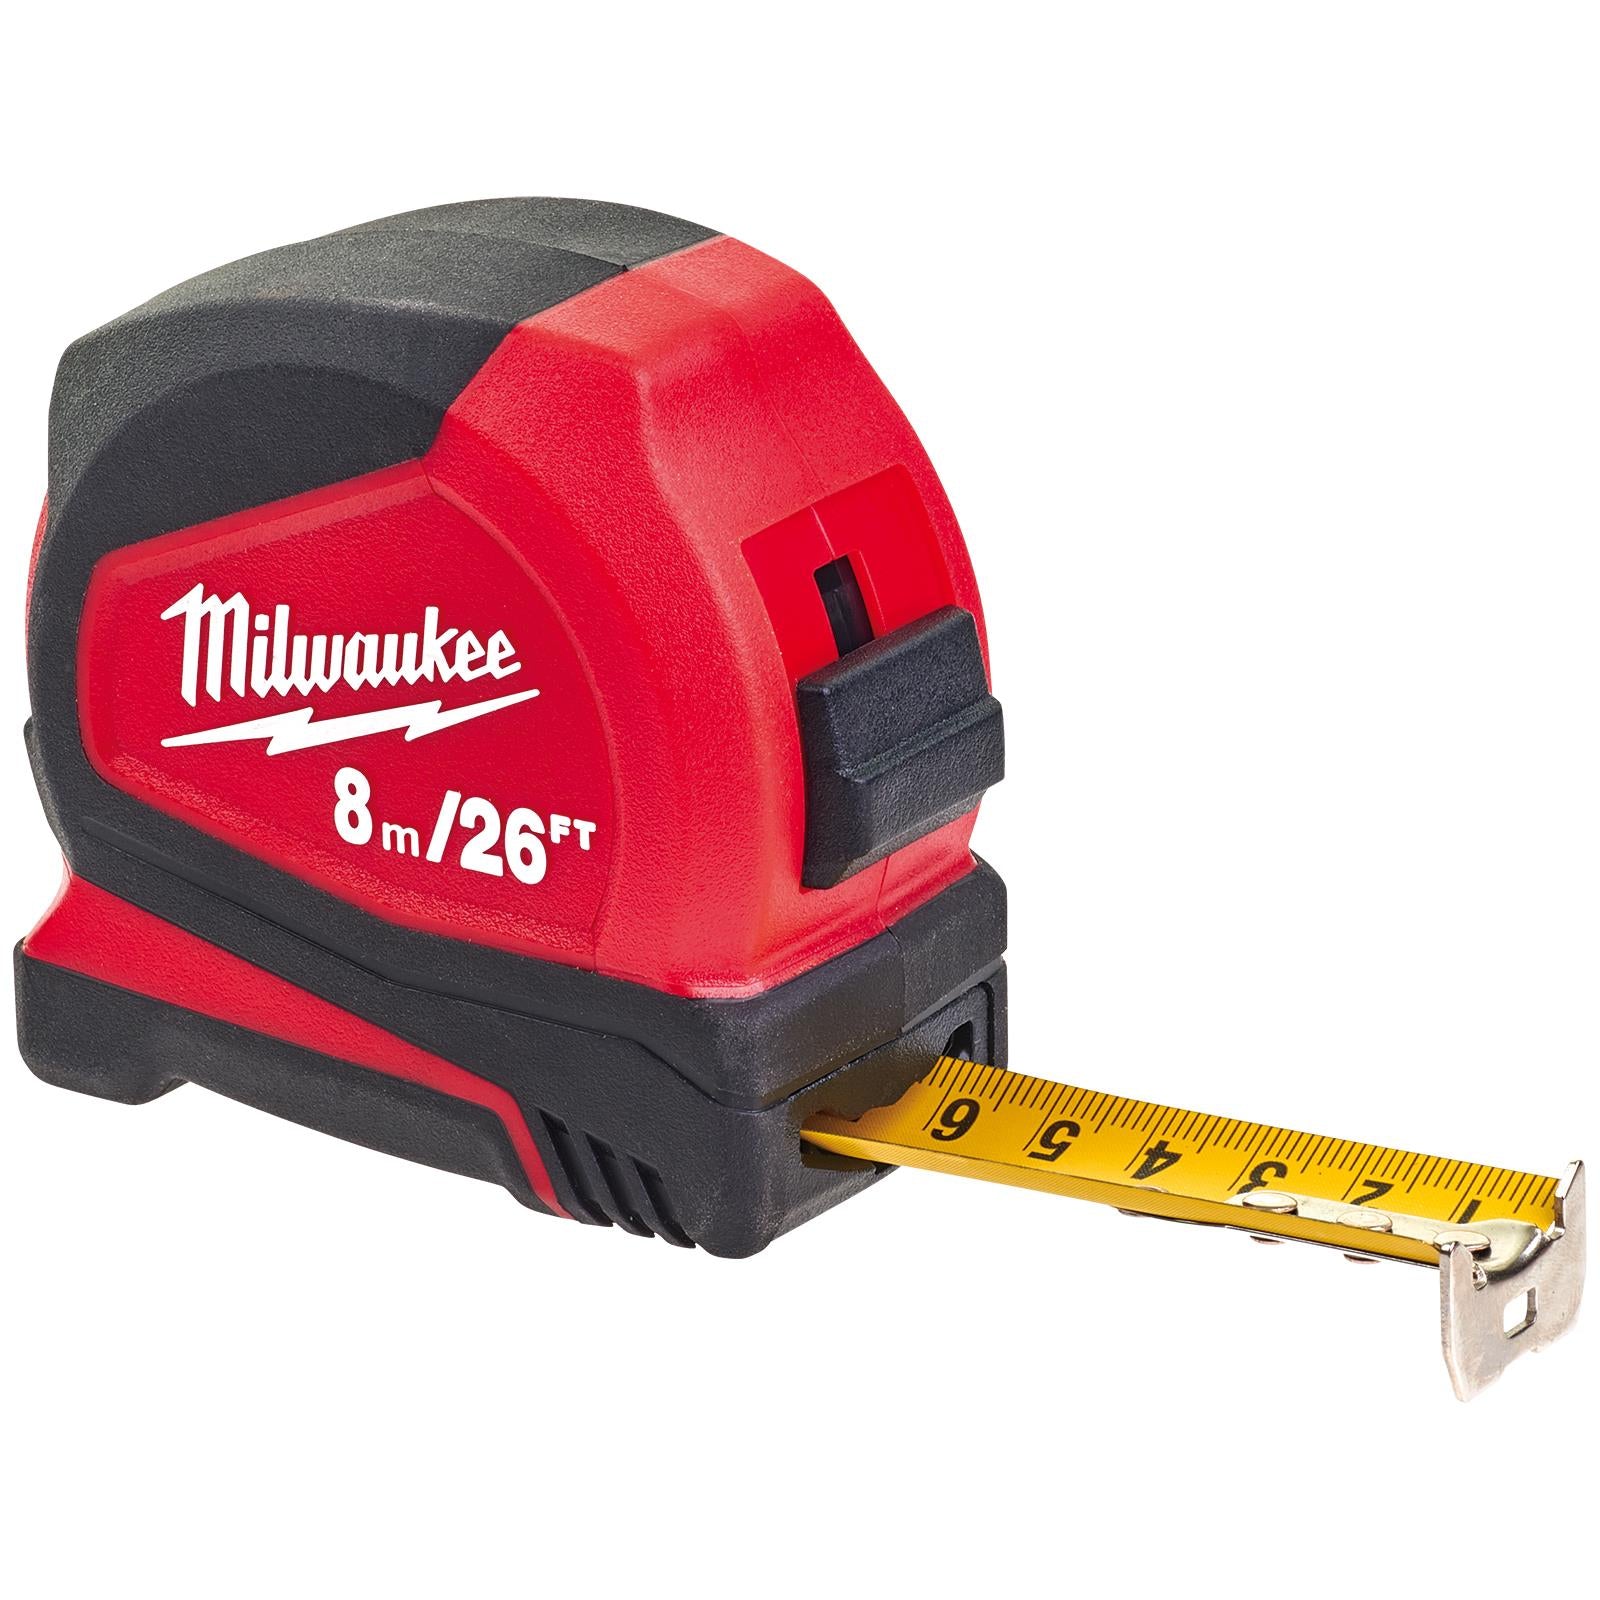 Milwaukee Tape Measure 8m 26ft Metric Imperial Pro Compact Pocket Tape 25mm Blade Width